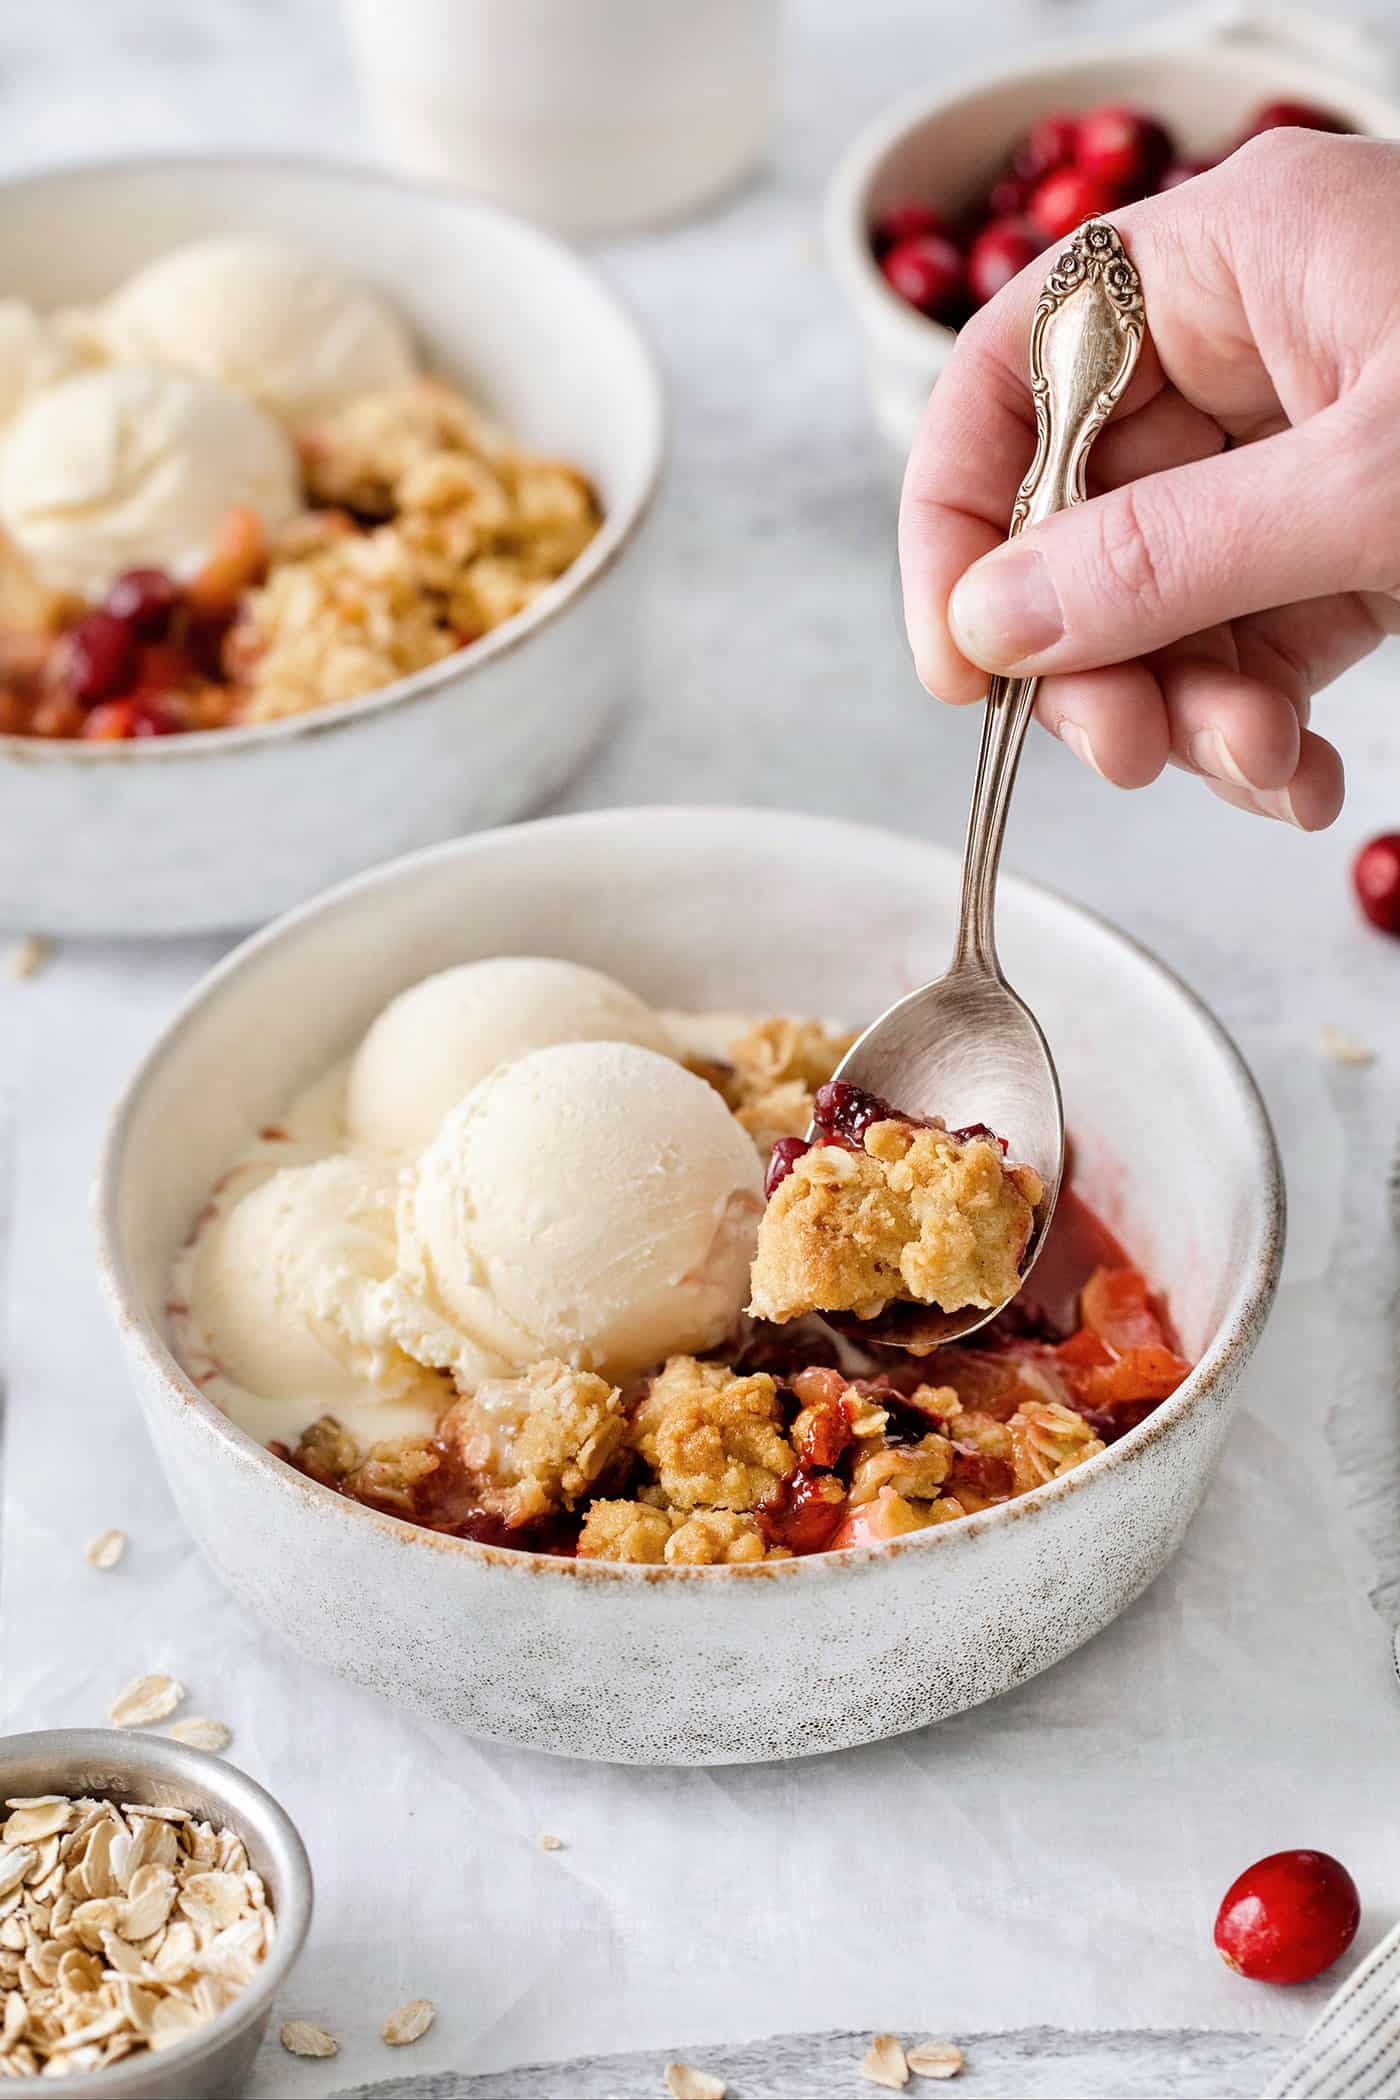 A hand holding a spoon dips into a bowl of cranberry apple crisp topped with vanilla ice cream.